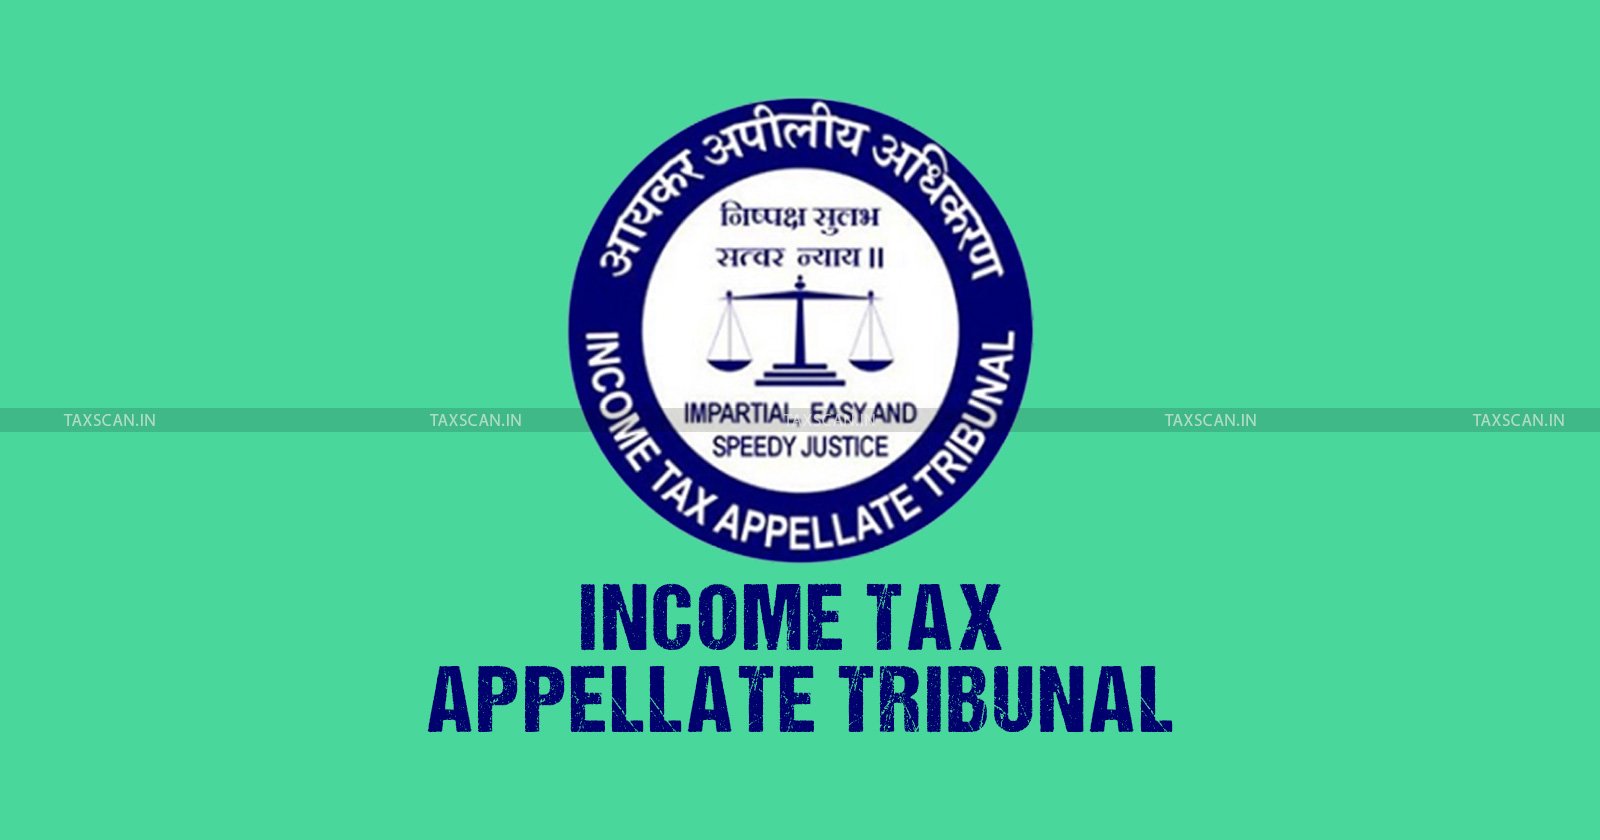 ITAT - income tax acts - Failure to examine property - Leasehold rights - TAXSACN